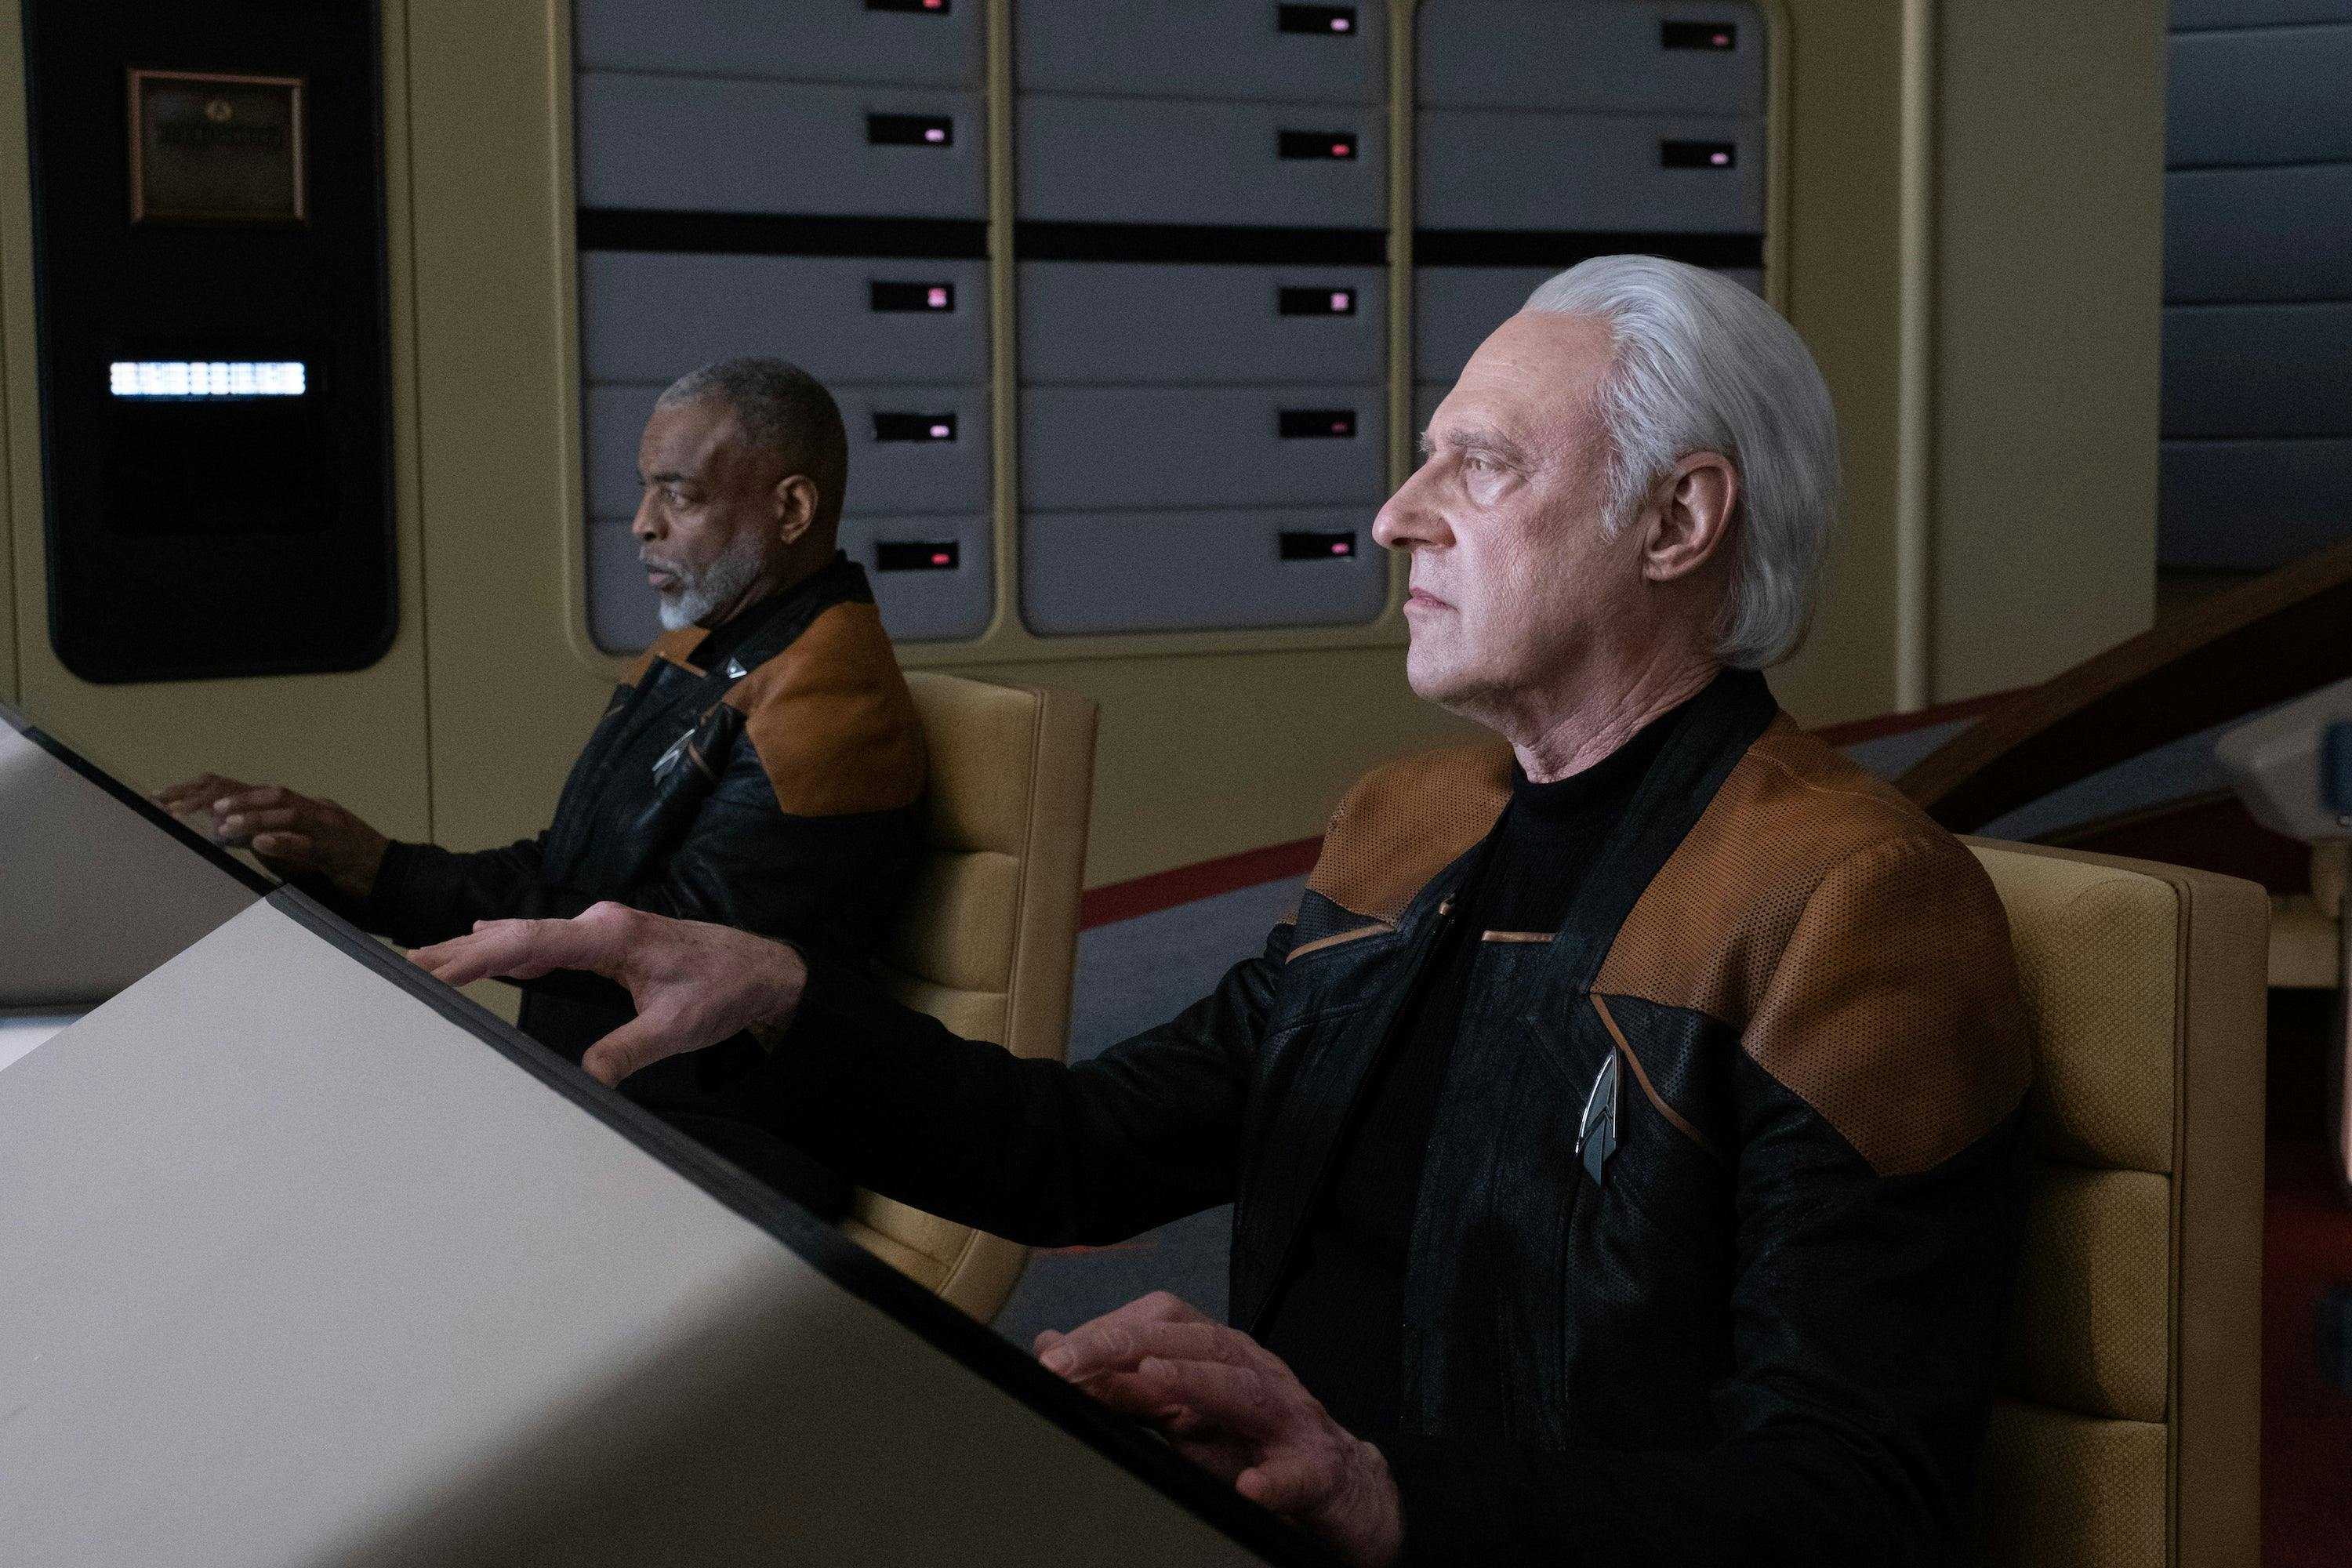 Geordi La Forge and Data sit at the helm and navigation aboard the reconstructed Enterprise-D in 'Vox'